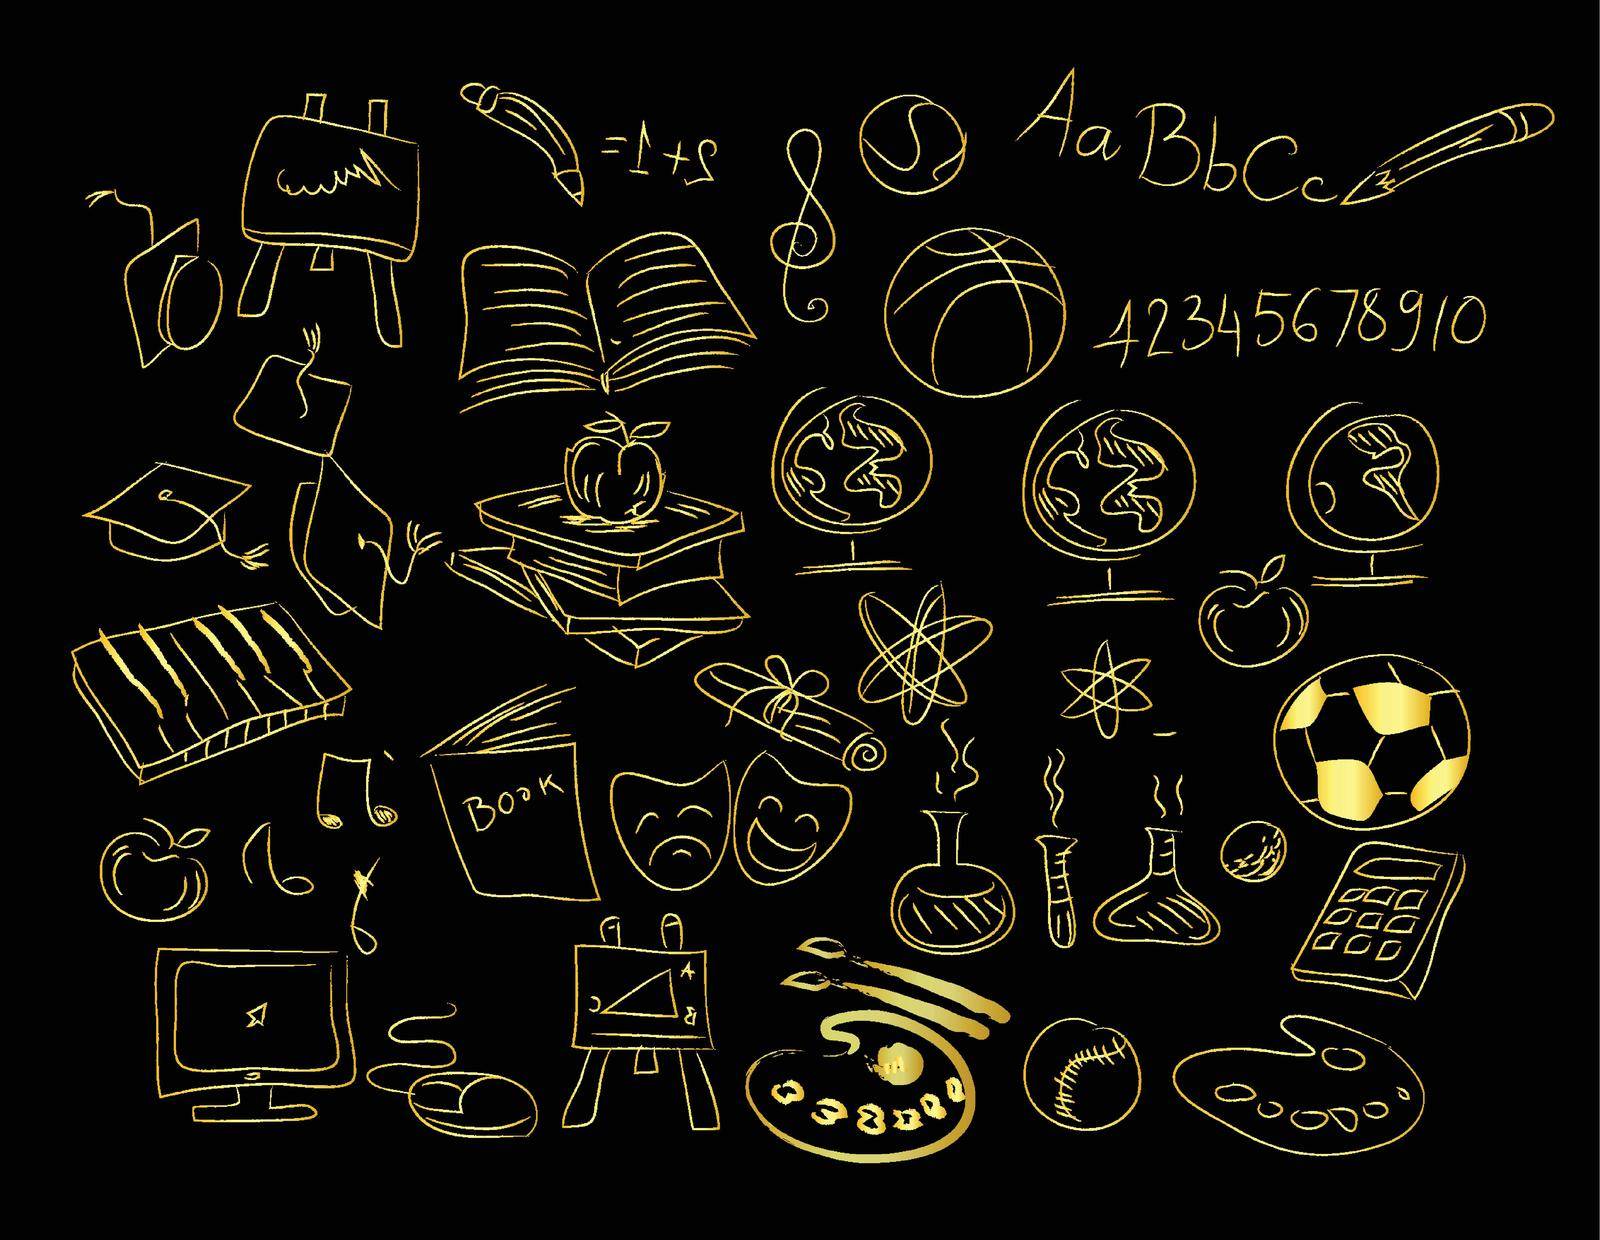 you can use Gold handraw education icons to design banners, posters, backgrounds, ...etc.